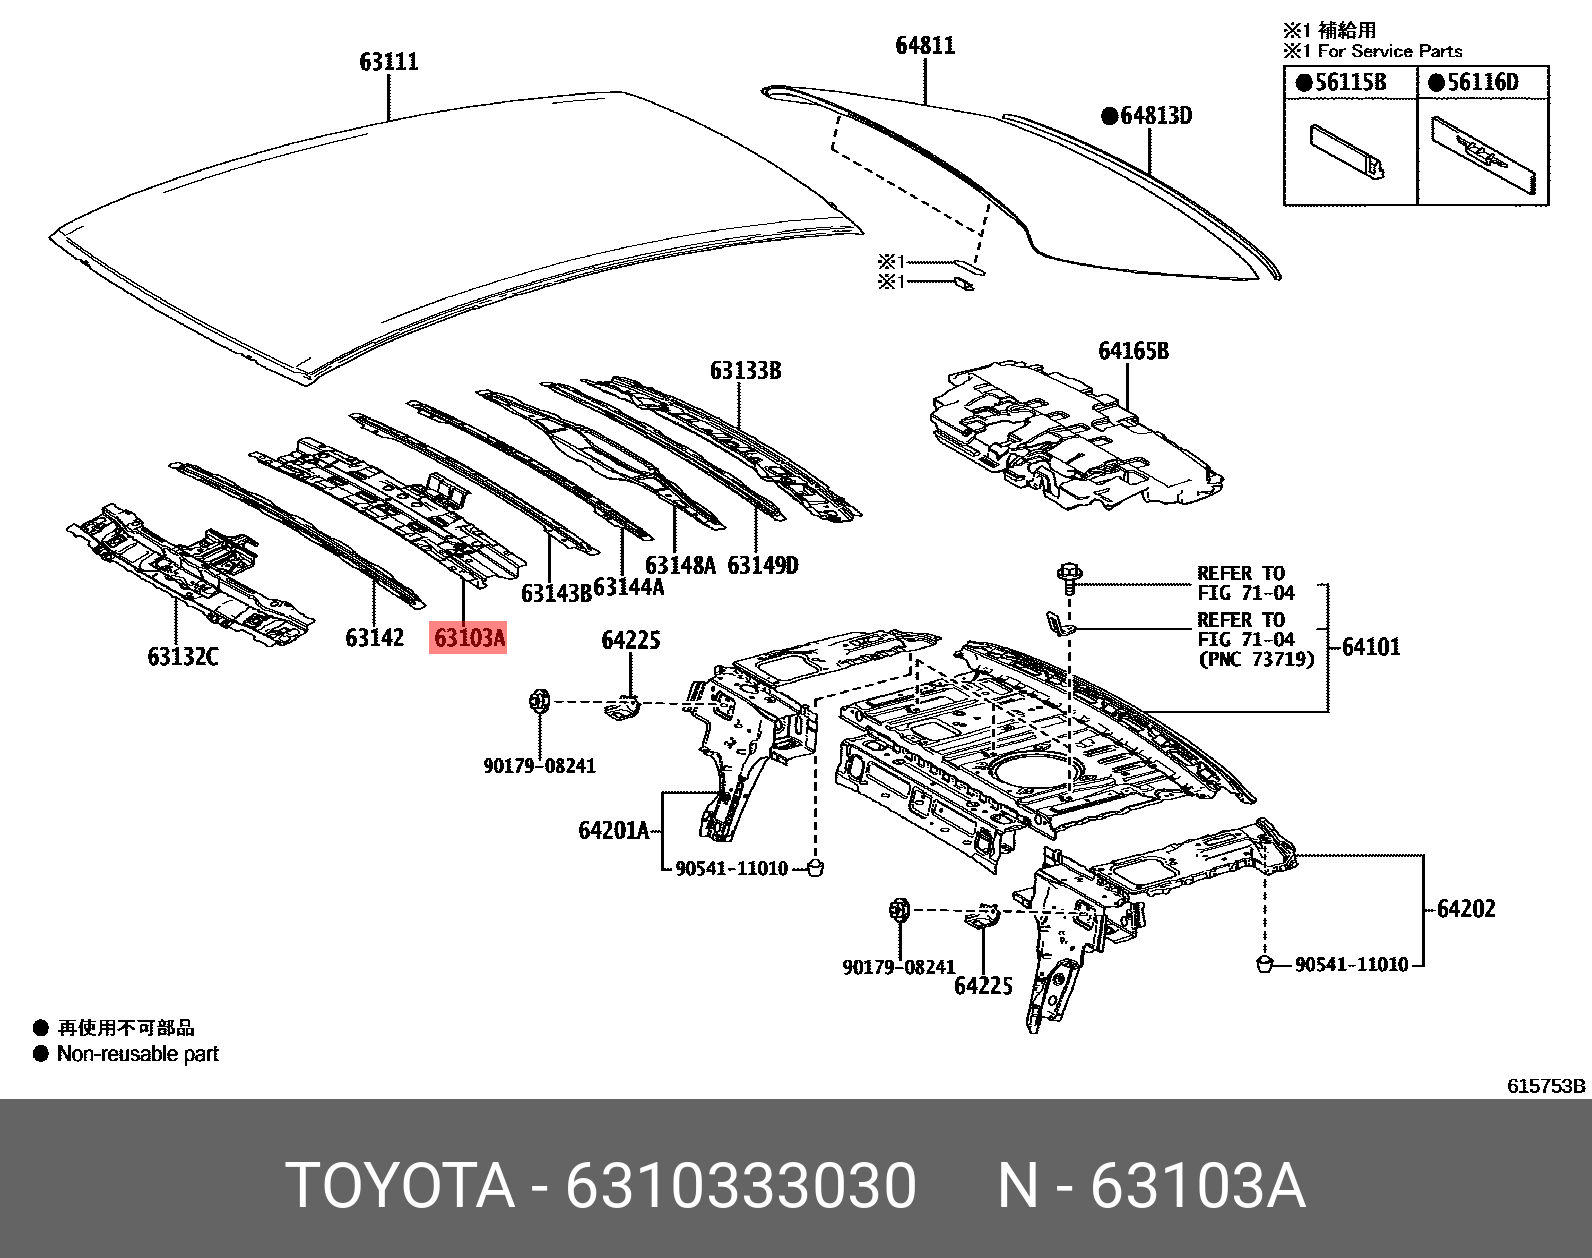 CAMRY 201706-, REINFORCEMENT SUB-ASSY, ROOF PANEL